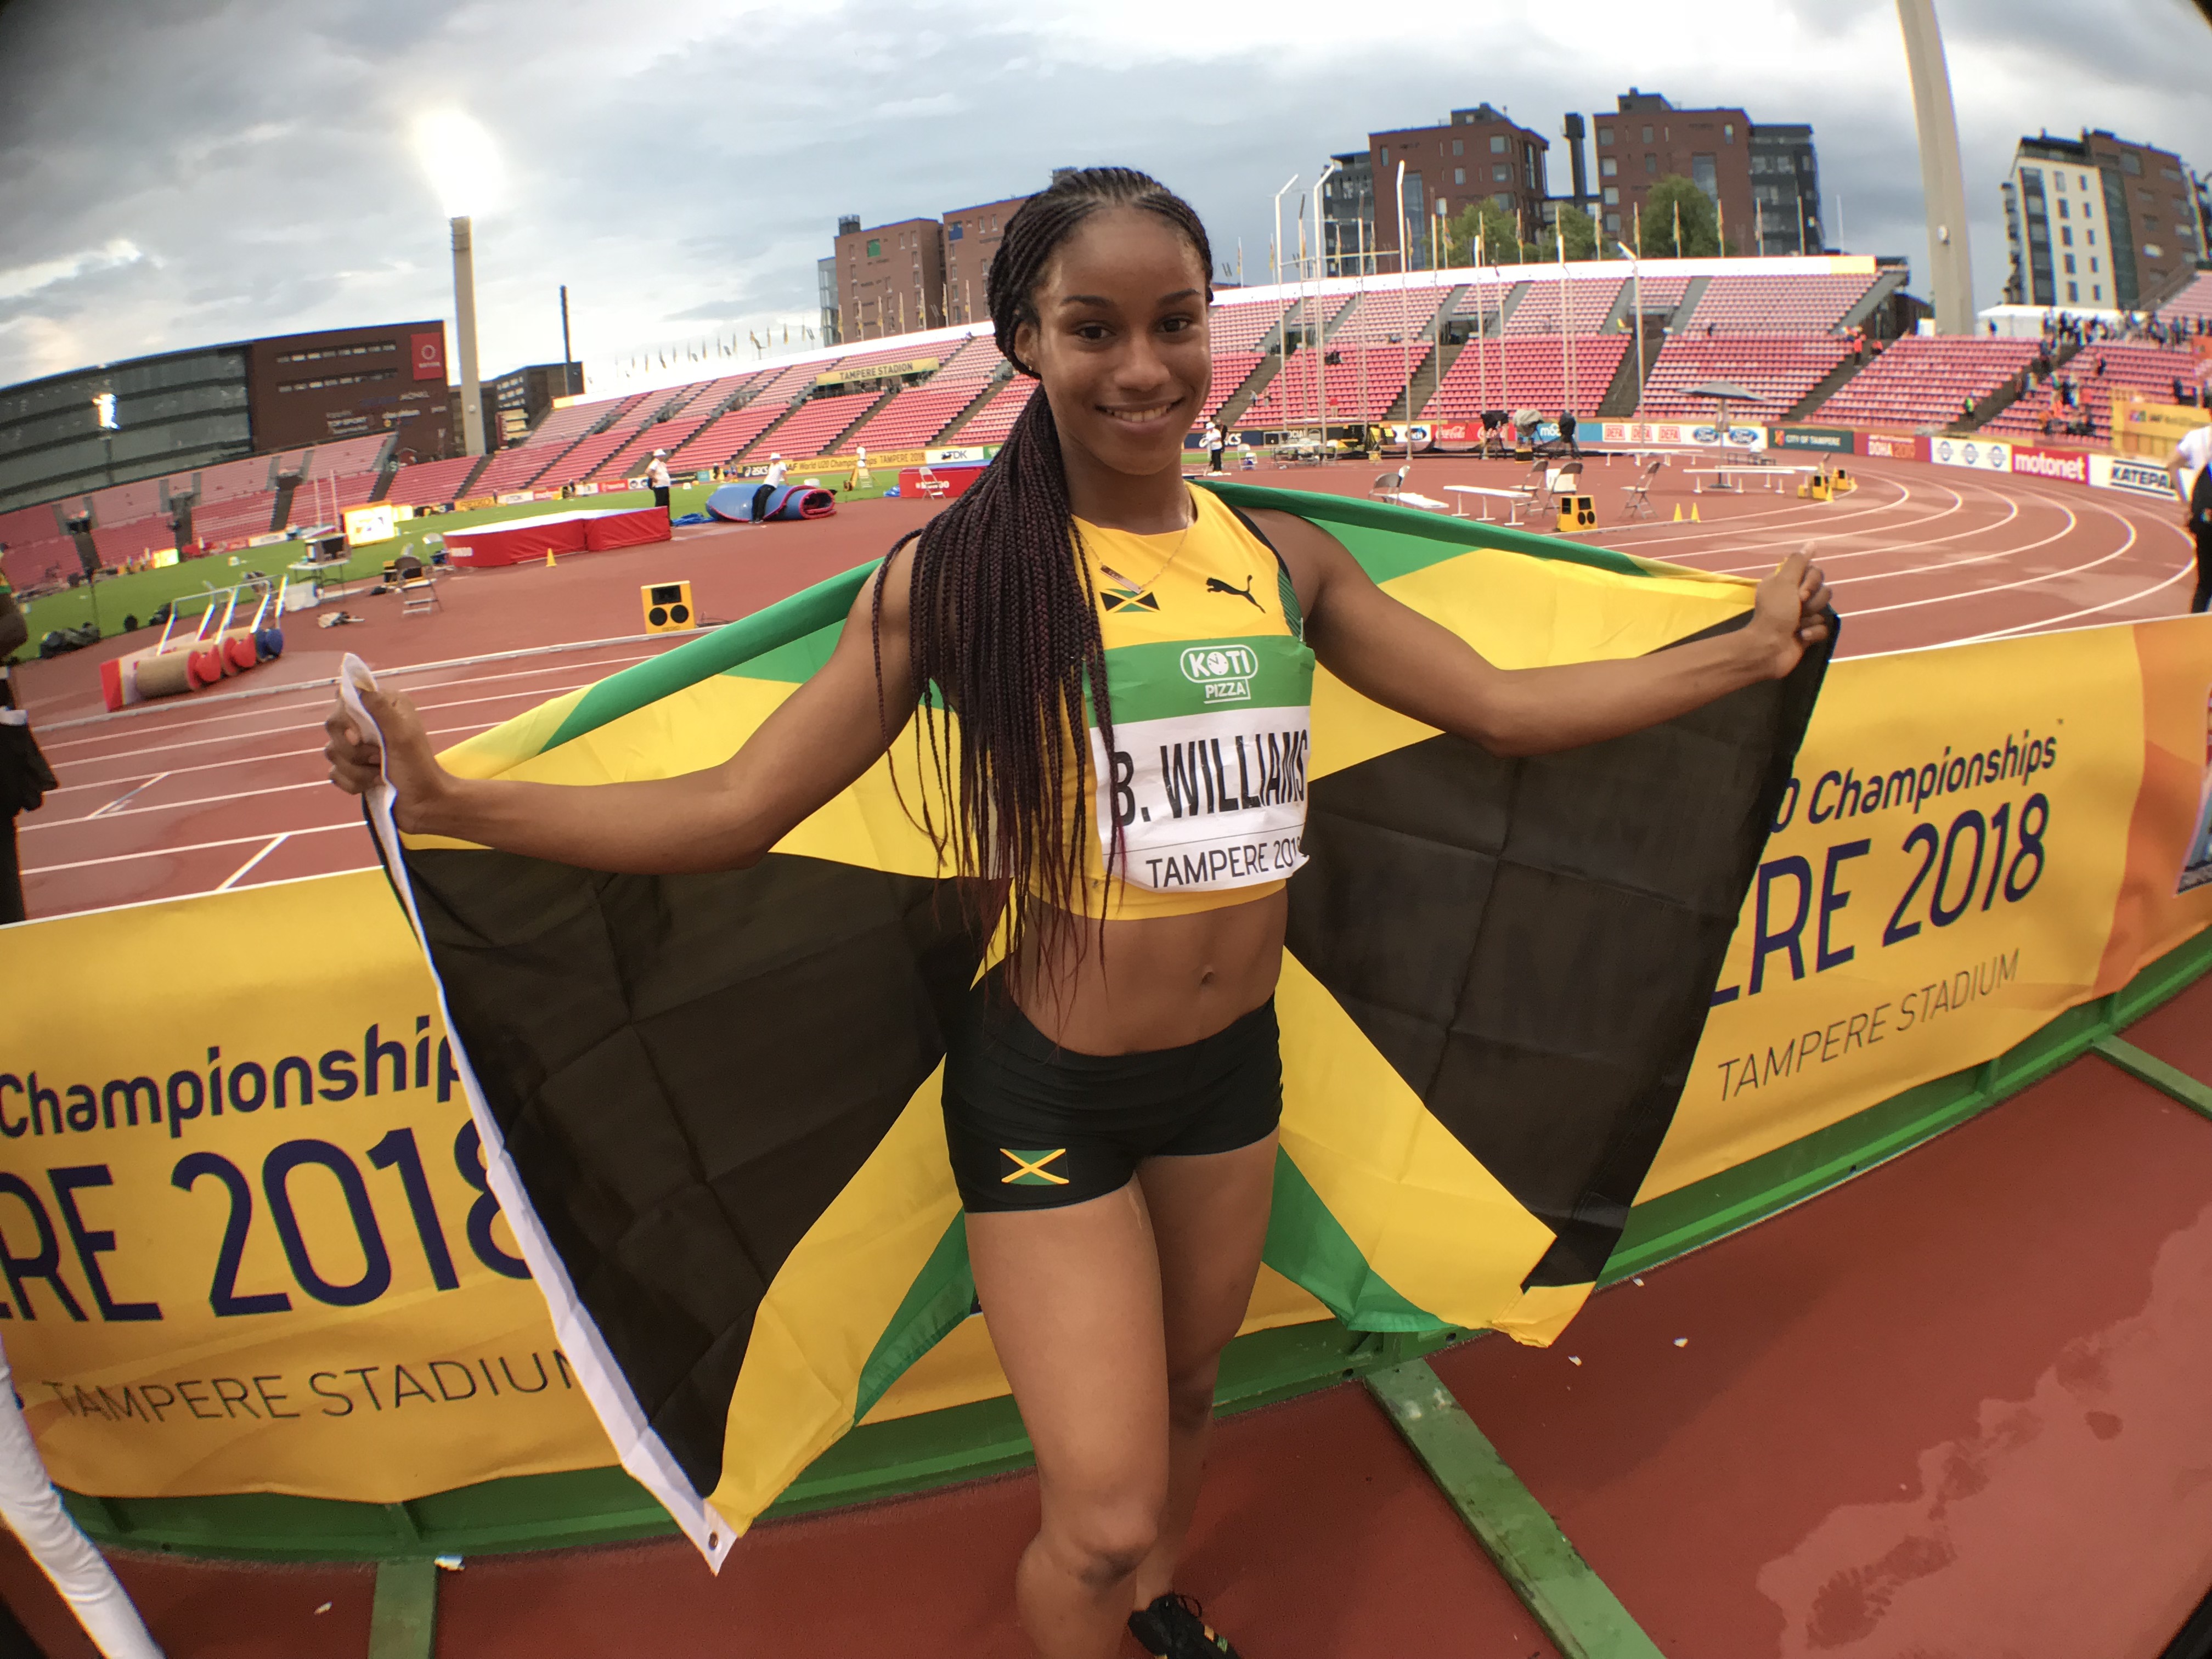 Briana Williams pleased with support after positive test